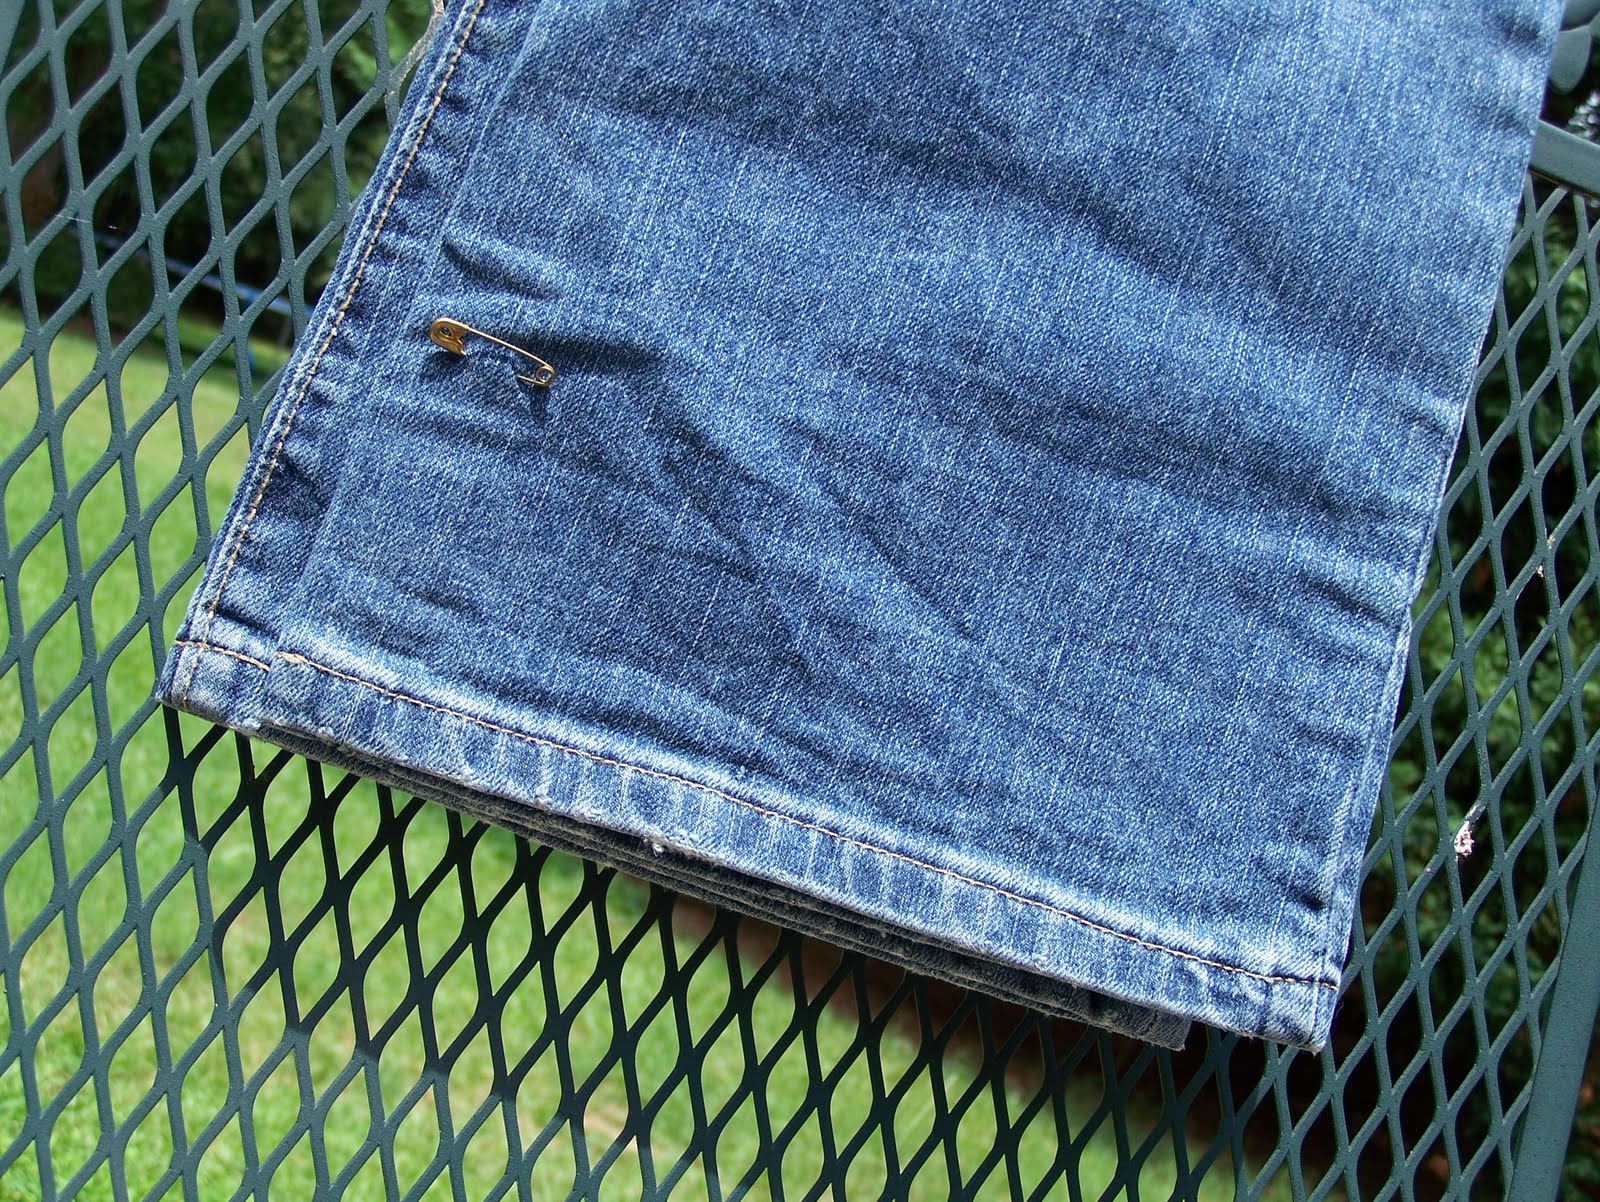 n' stitches designs: Hemming Jeans - A Sewing Tutorial Test Run